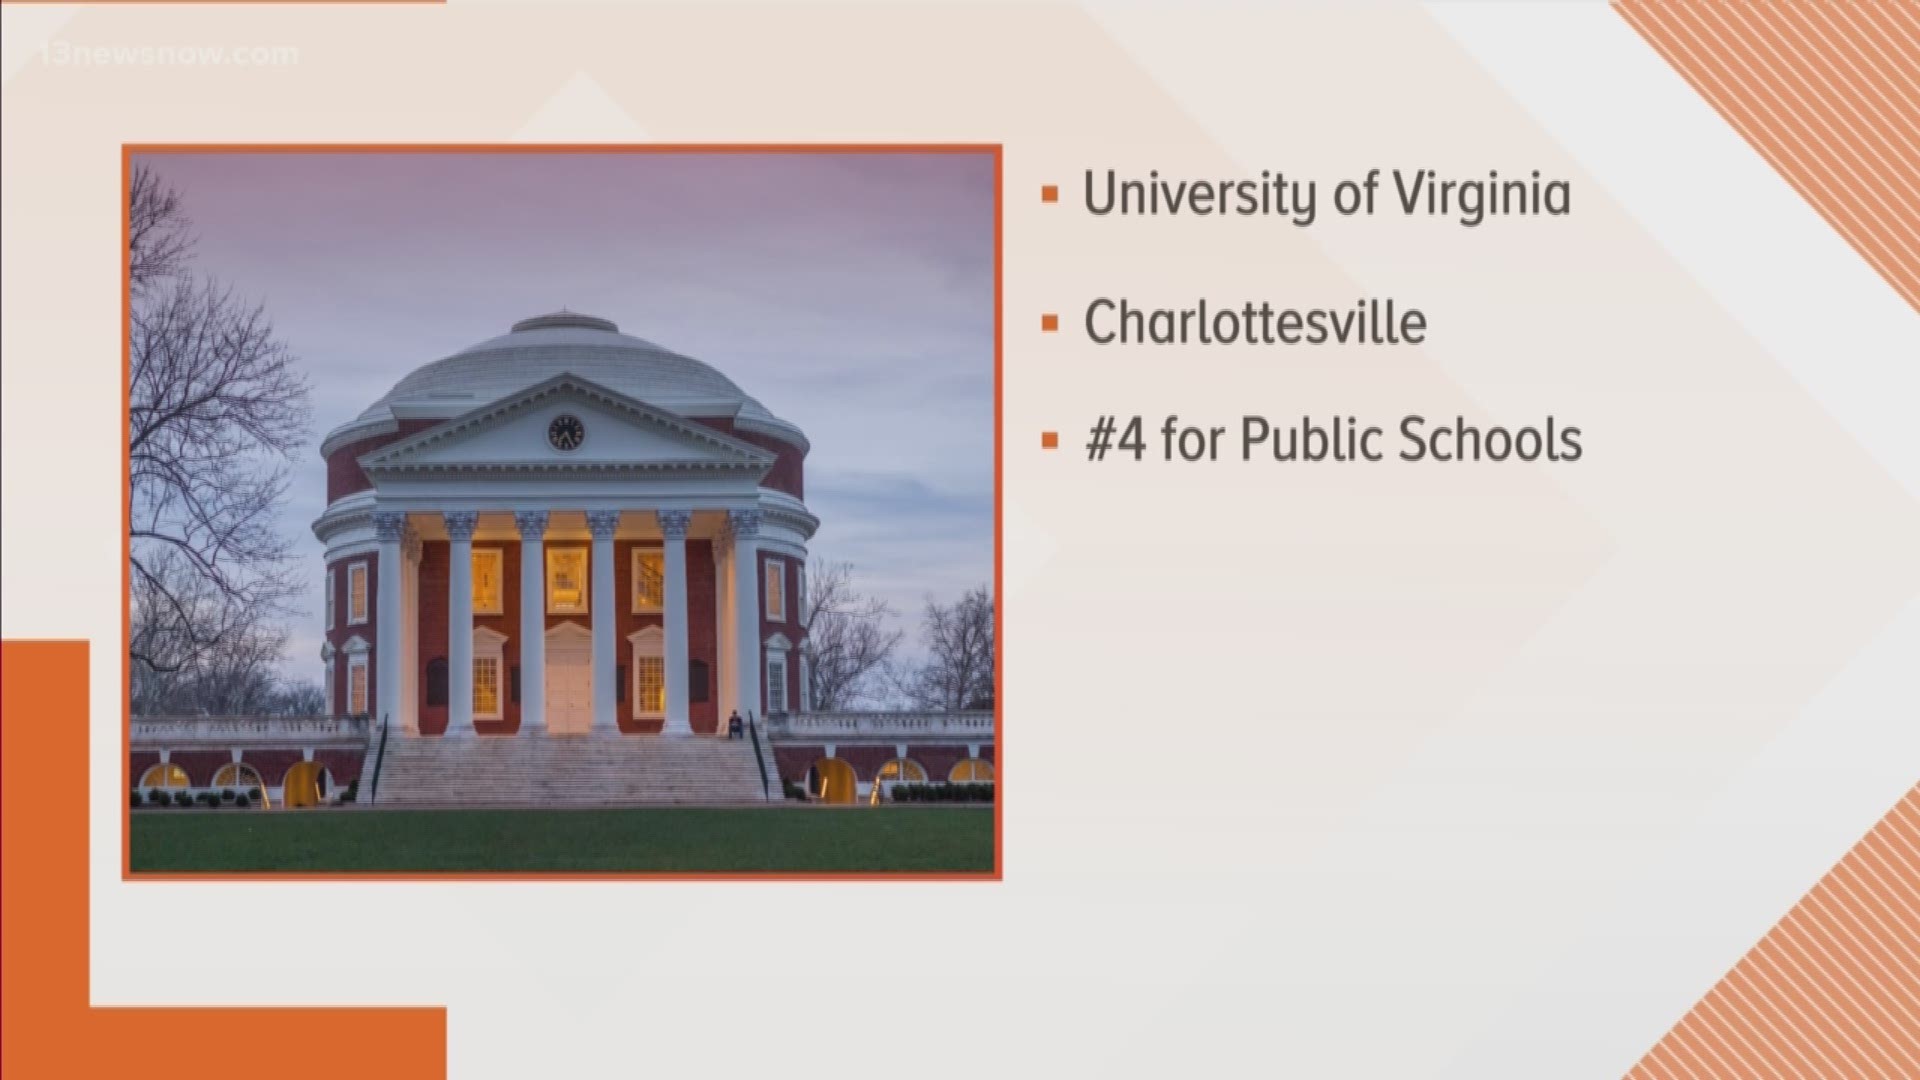 US News and World Report has released its annual list of the top public schools in the country, and five Virginia schools made the top 100.